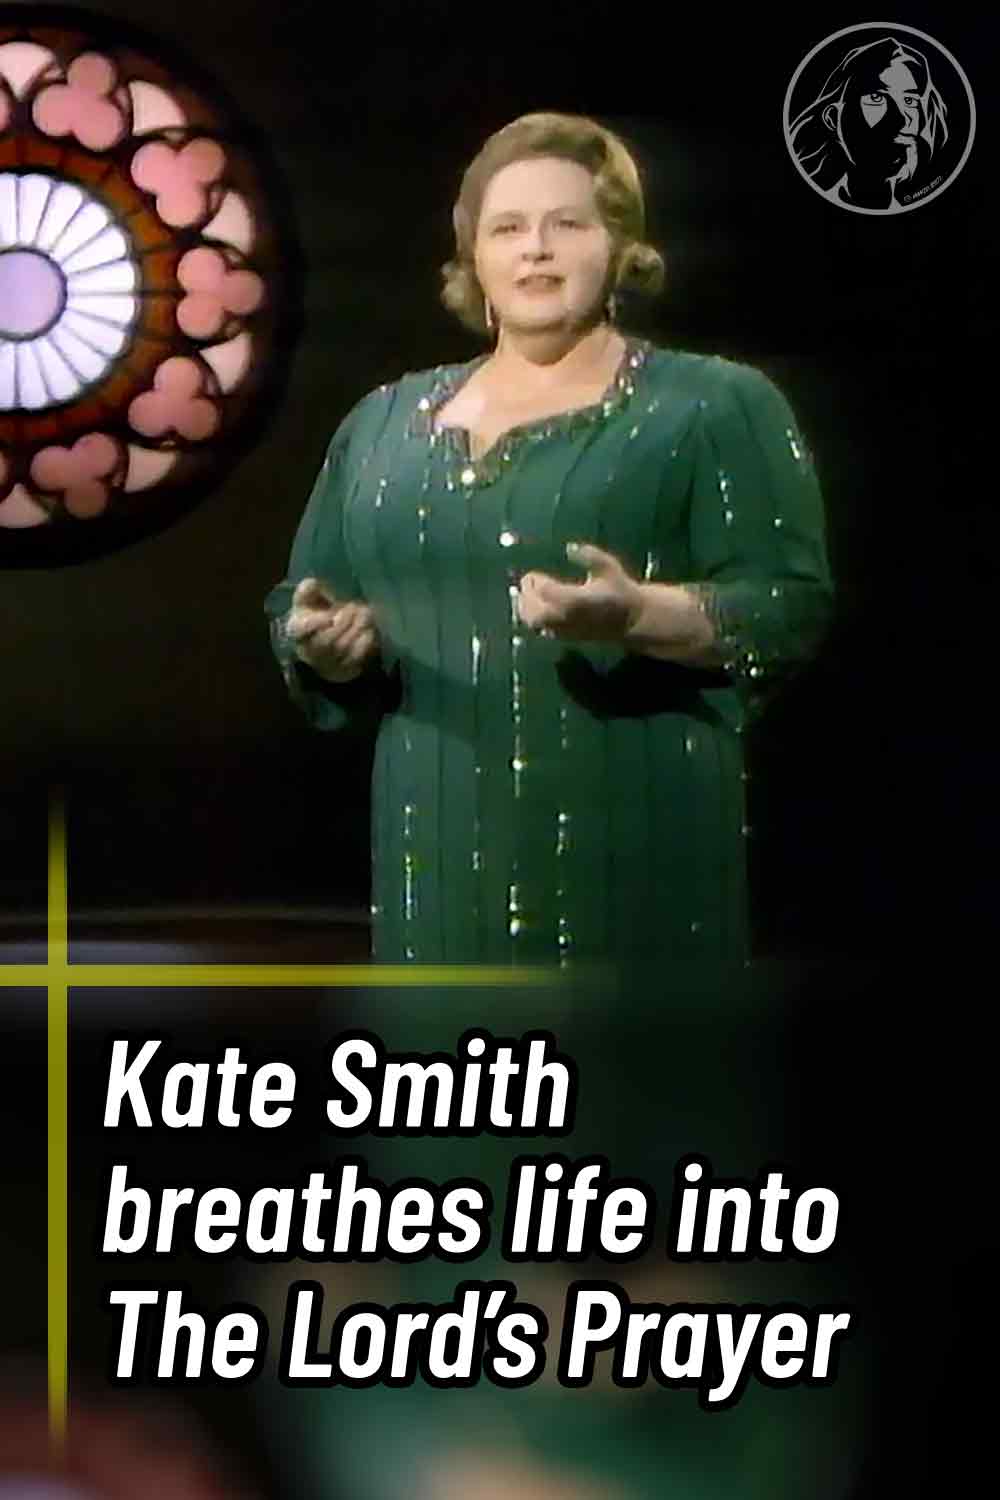 Kate Smith breathes life into The Lord’s Prayer